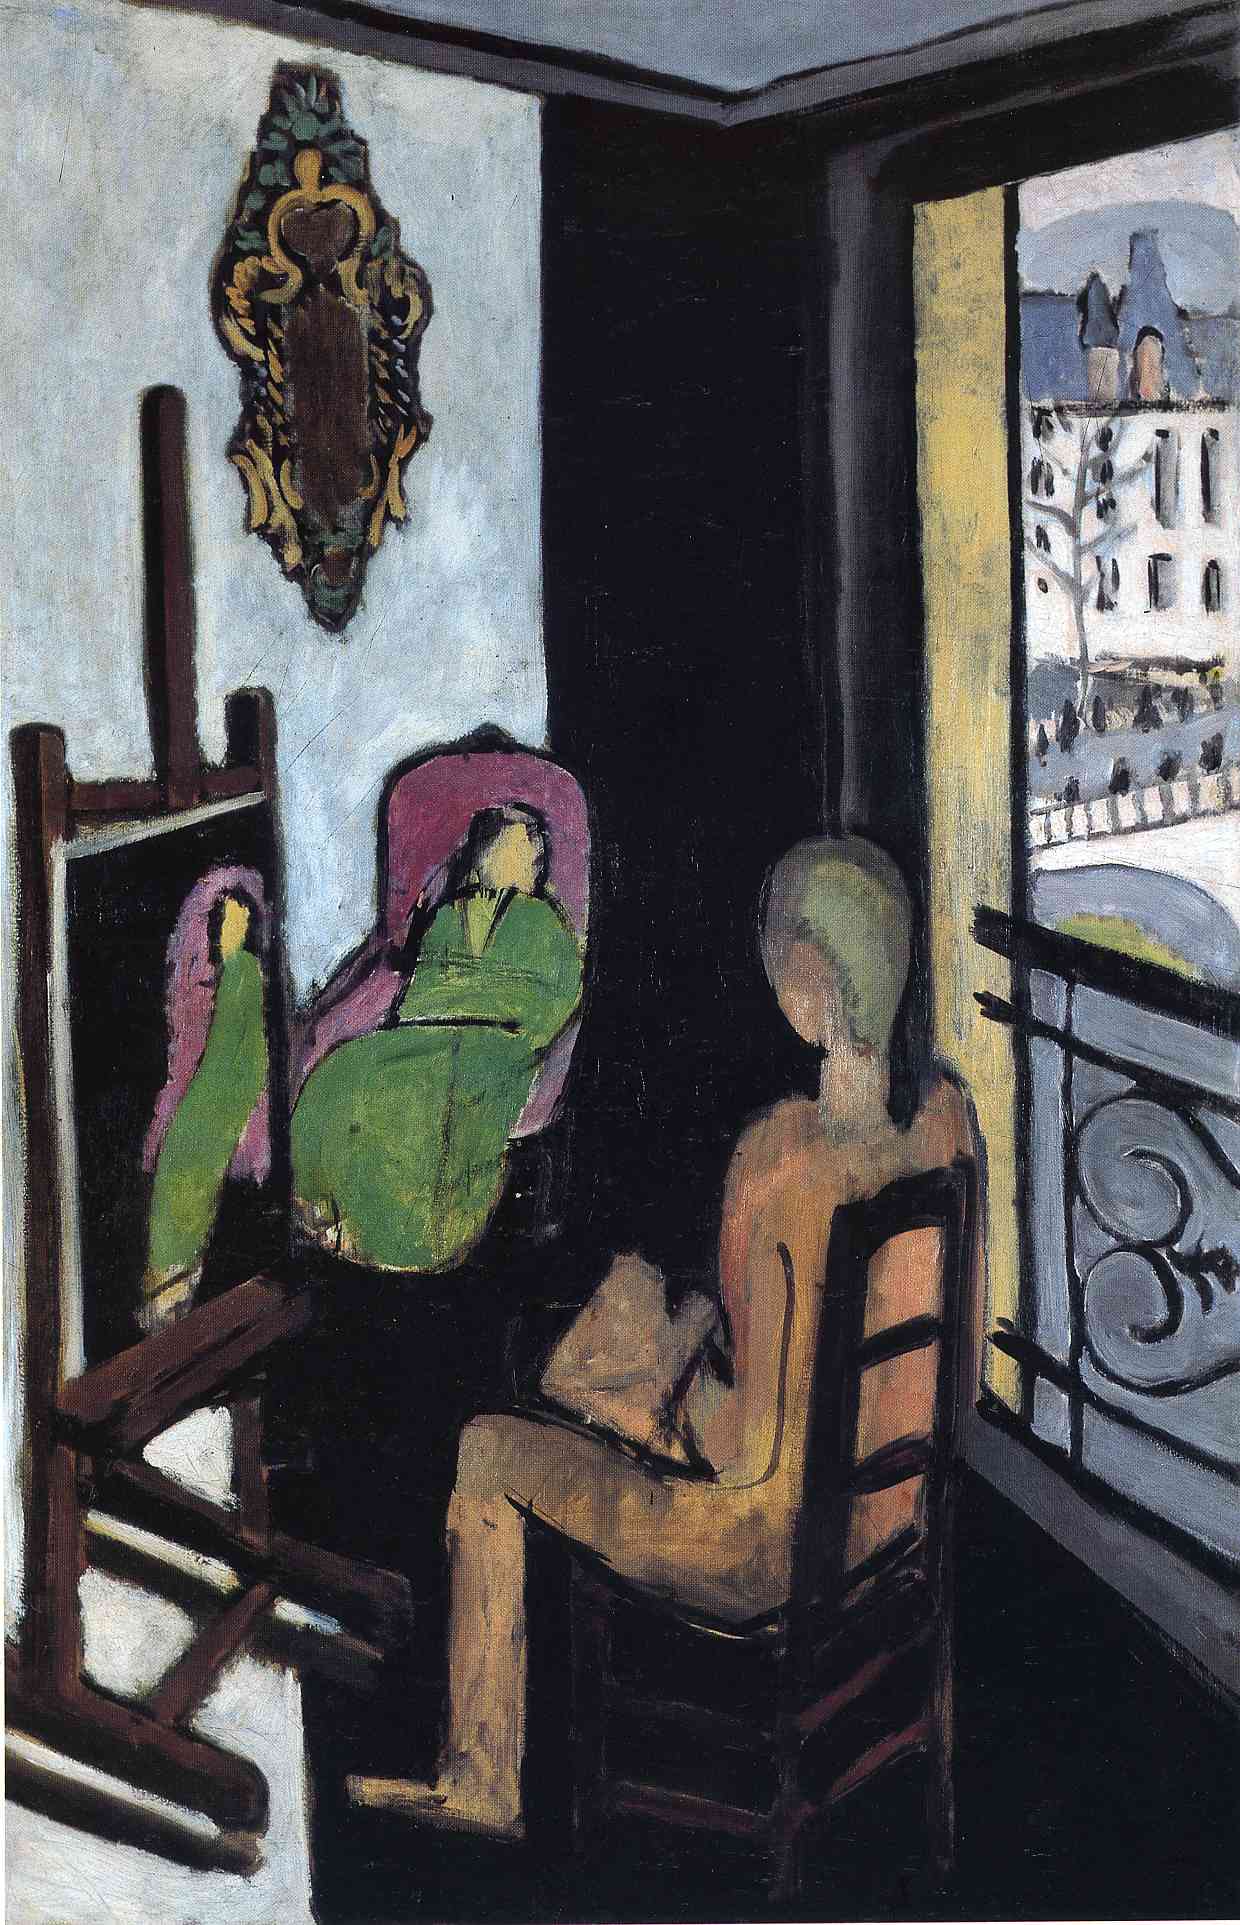 Henri Matisse - The Painter and his Model 1917